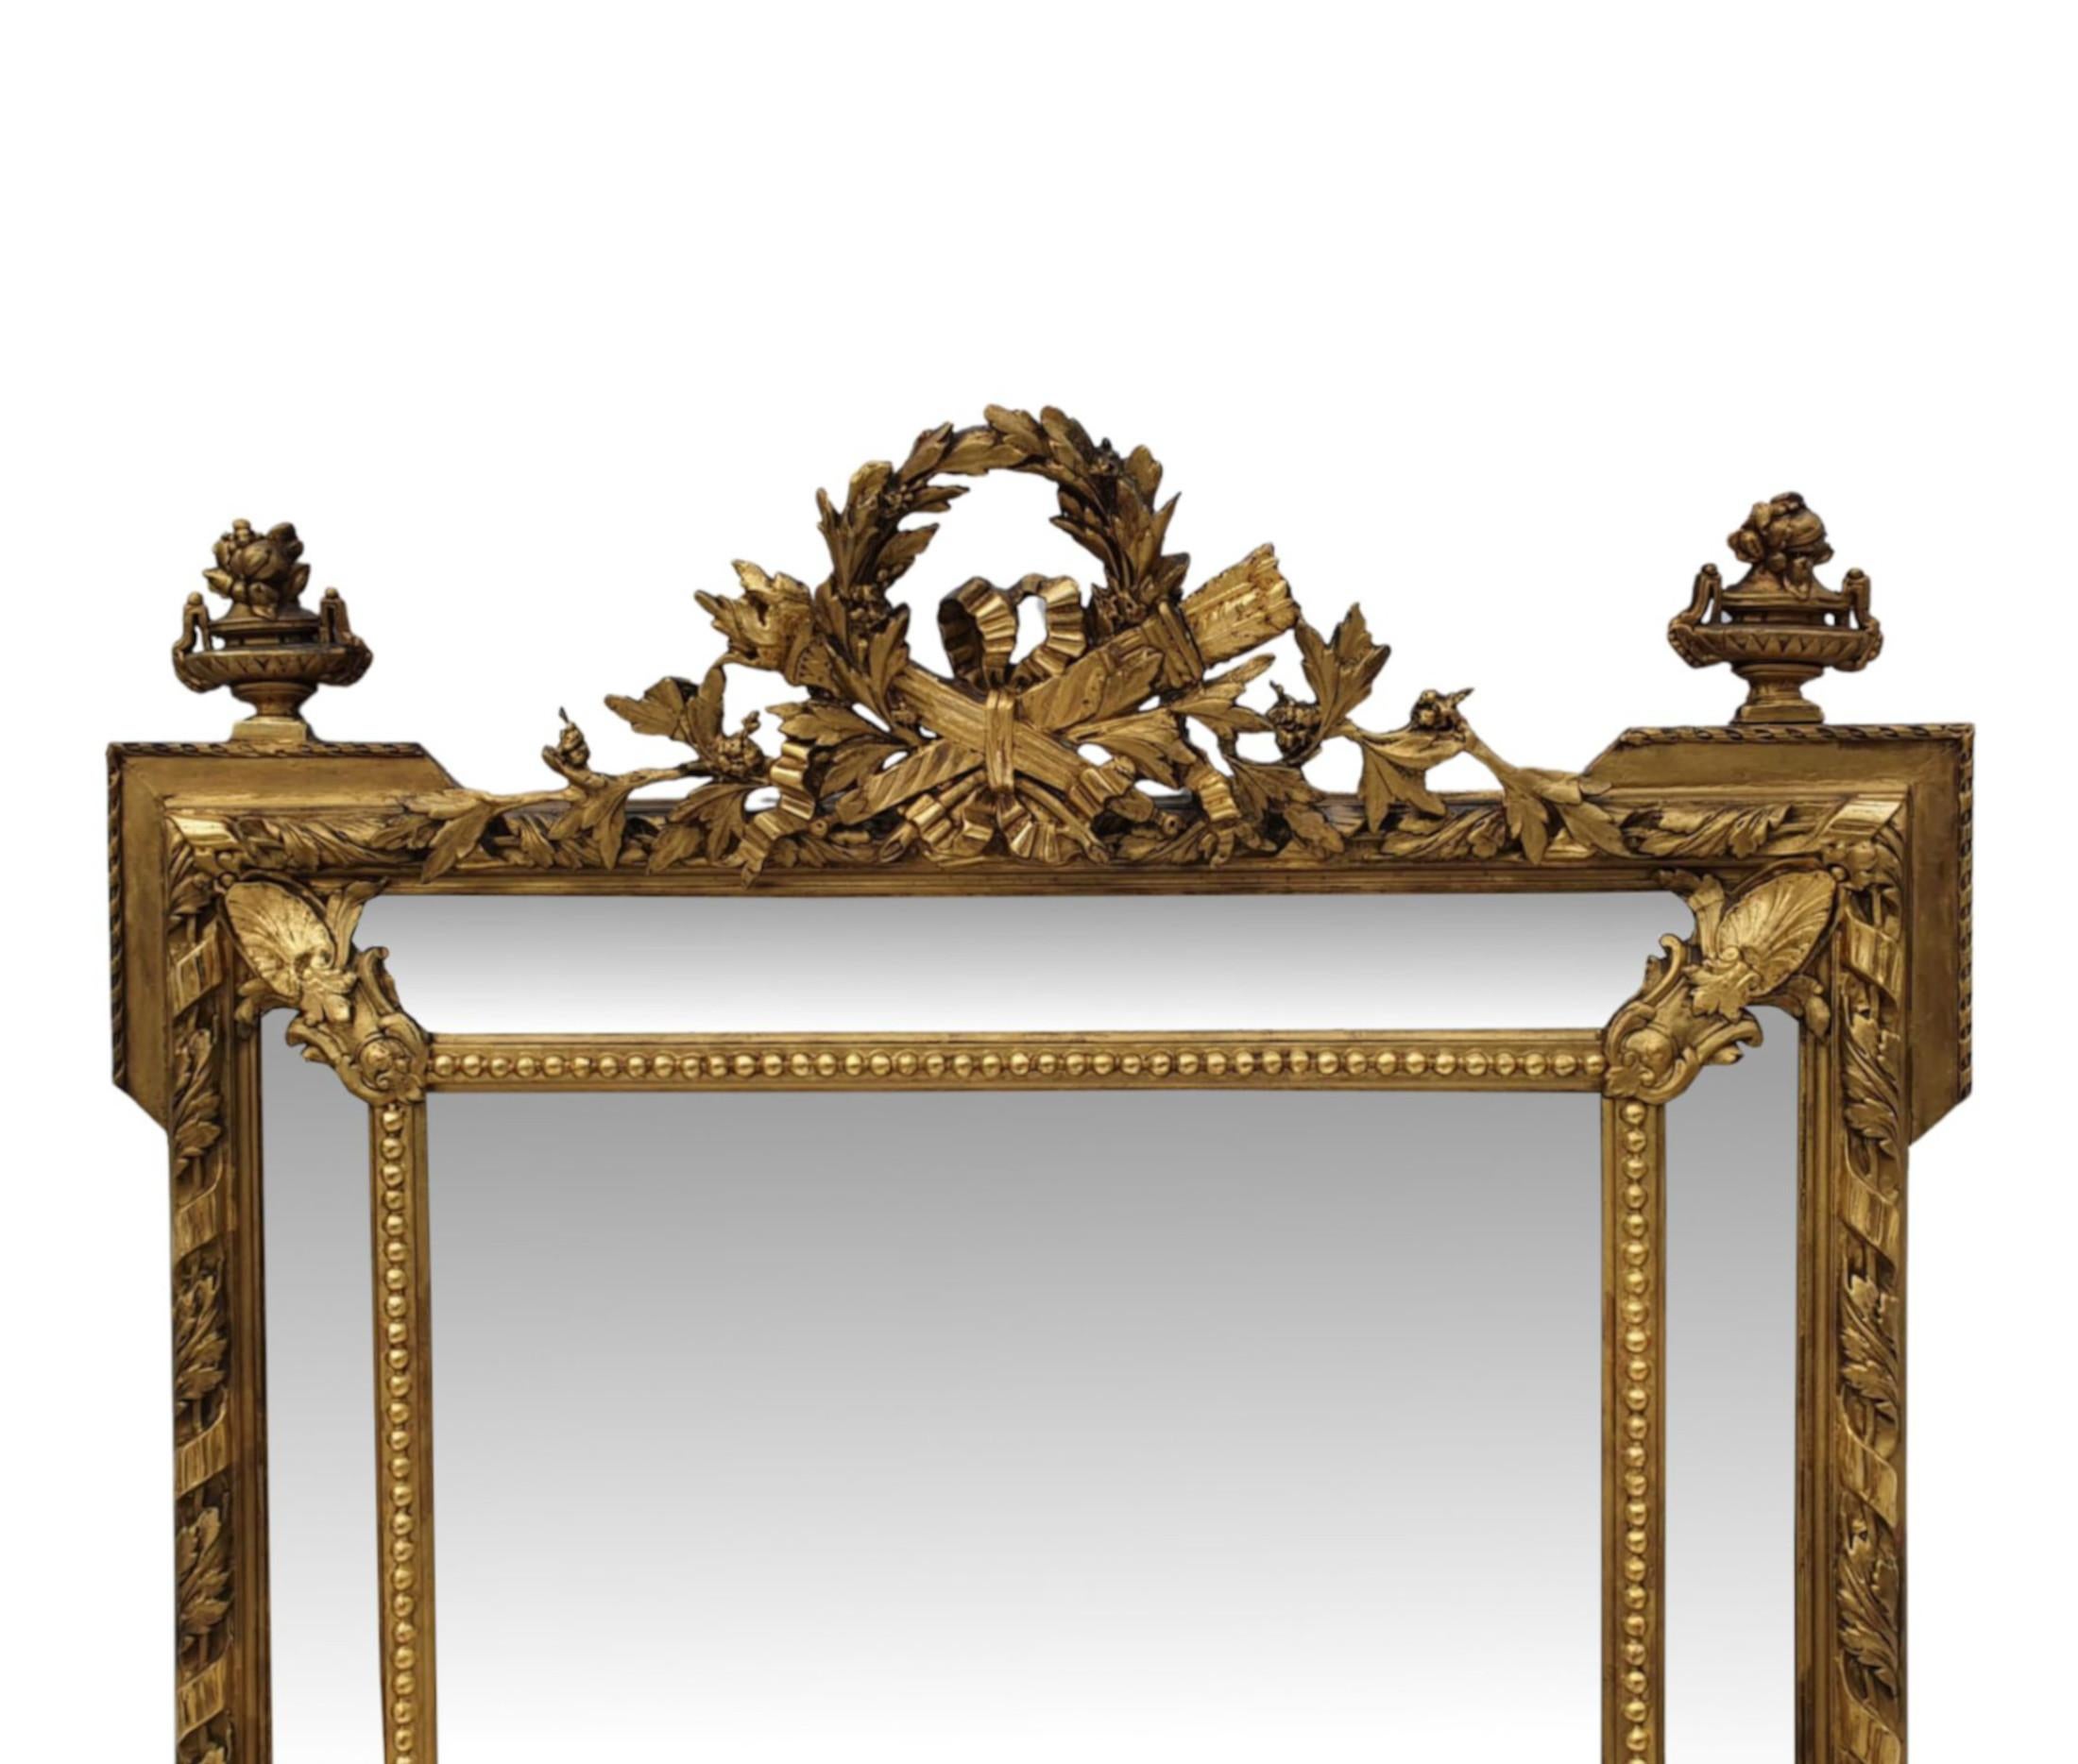 A very fine 19th century giltwood margin overmanatle or hall mirror of large proportions. The mirror glass plate of rectangular form set within a fabulously hand carved, moulded and shaped giltwood frame with beading, ribbon twist, leaf and foliate